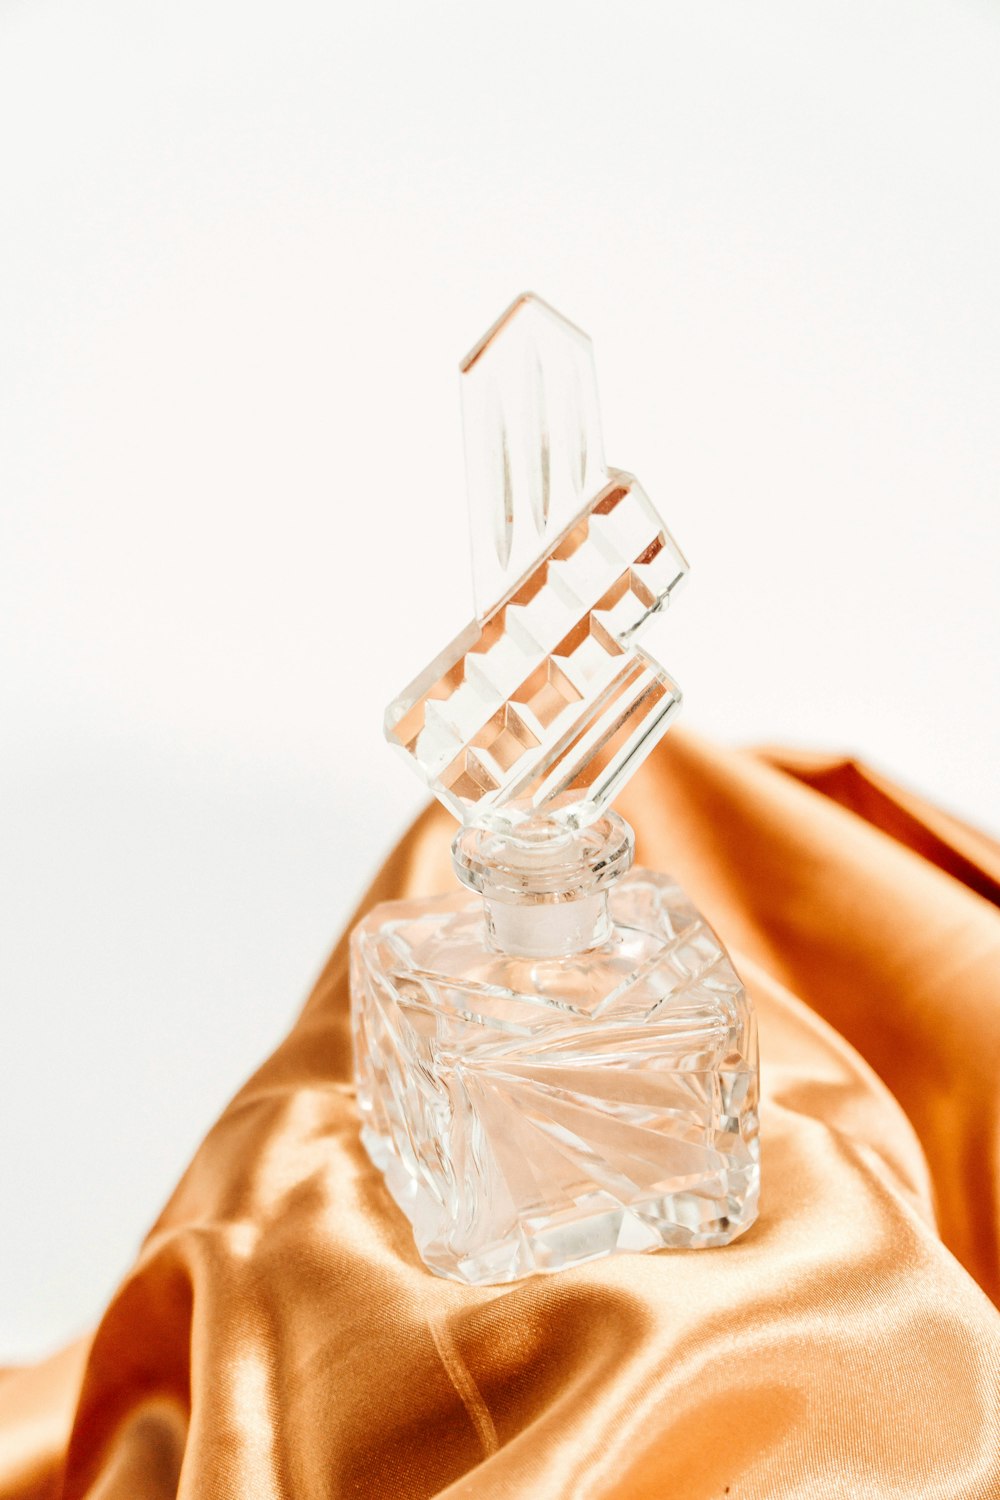 clear glass perfume bottle on brown textile